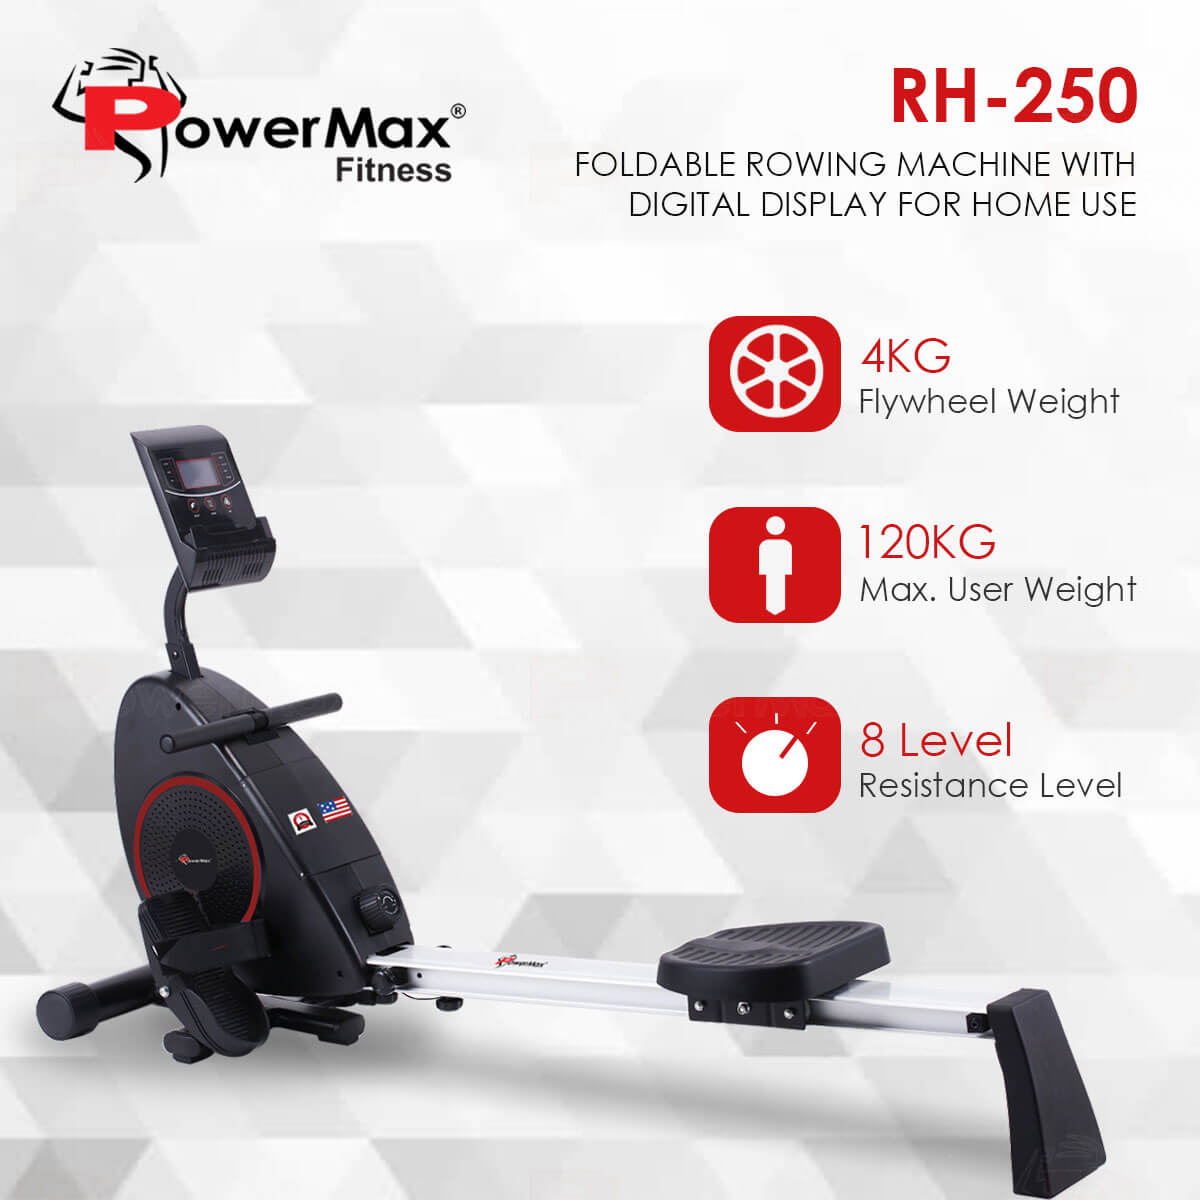 PowerMax Fitness RH-250 Foldable Rowing Machine with Digital Display for Home use